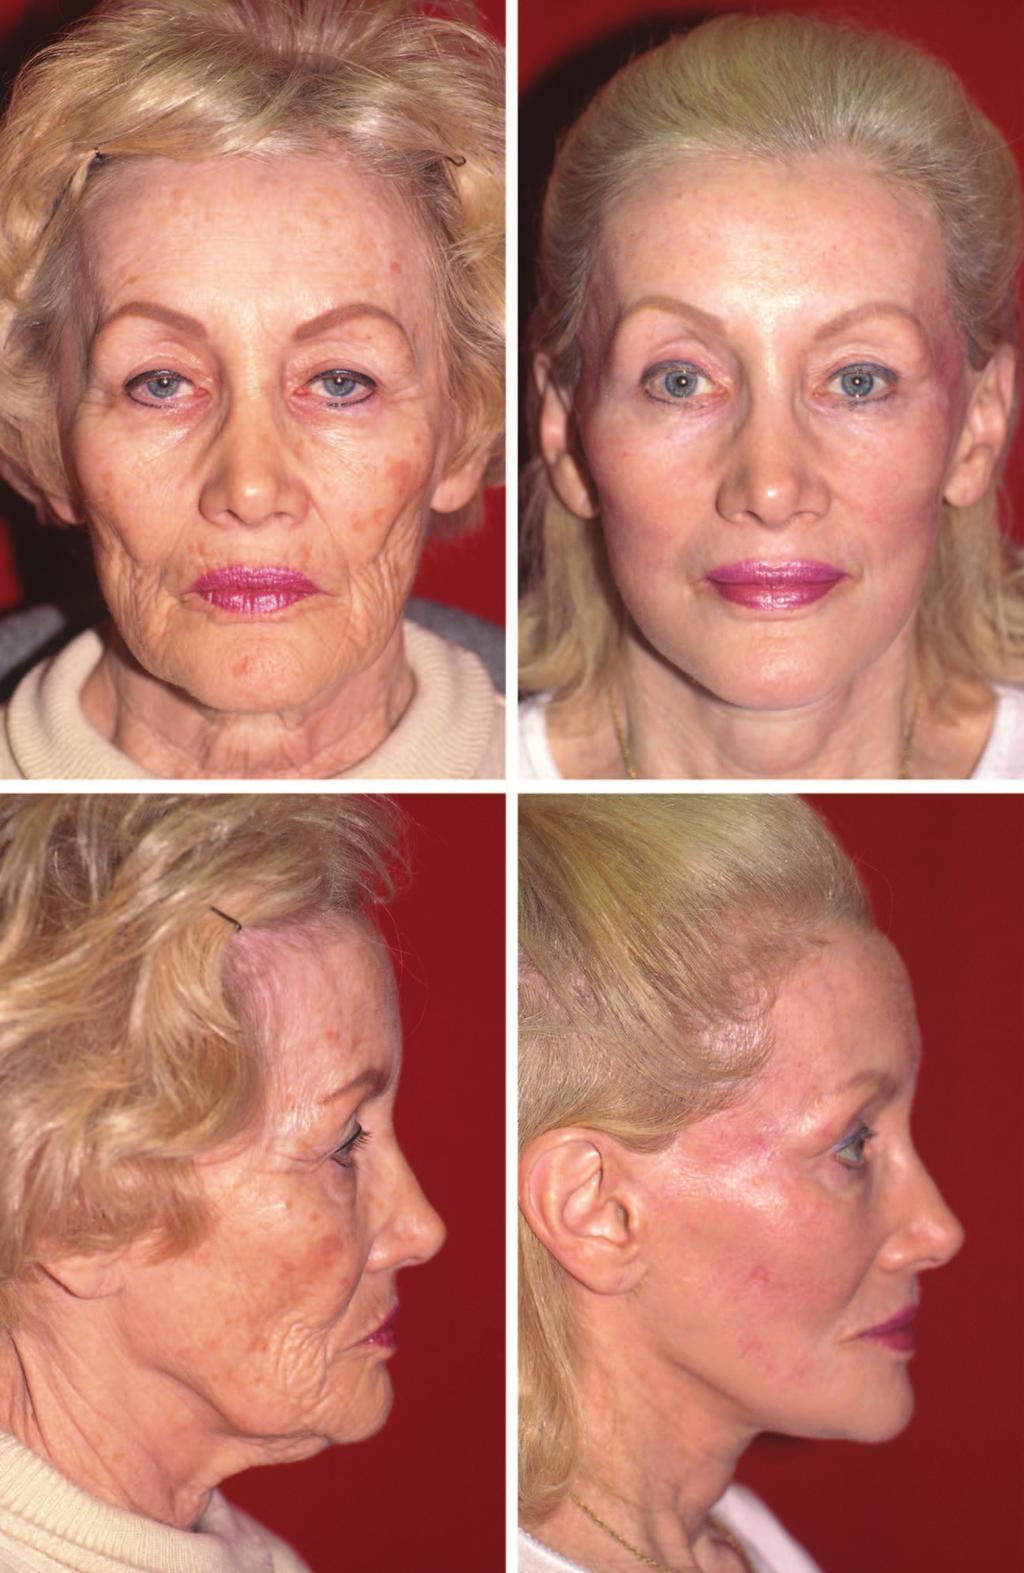 Volume 130, Number 5S-3 Vest-over-Pants Platysmarrhaphy Fig. 5. Patient before (left) and 1 year after (right) a rhytidectomy, platysmarrhaphy, ptosis correction, and full face laser resurfacing (frontal and profile views).